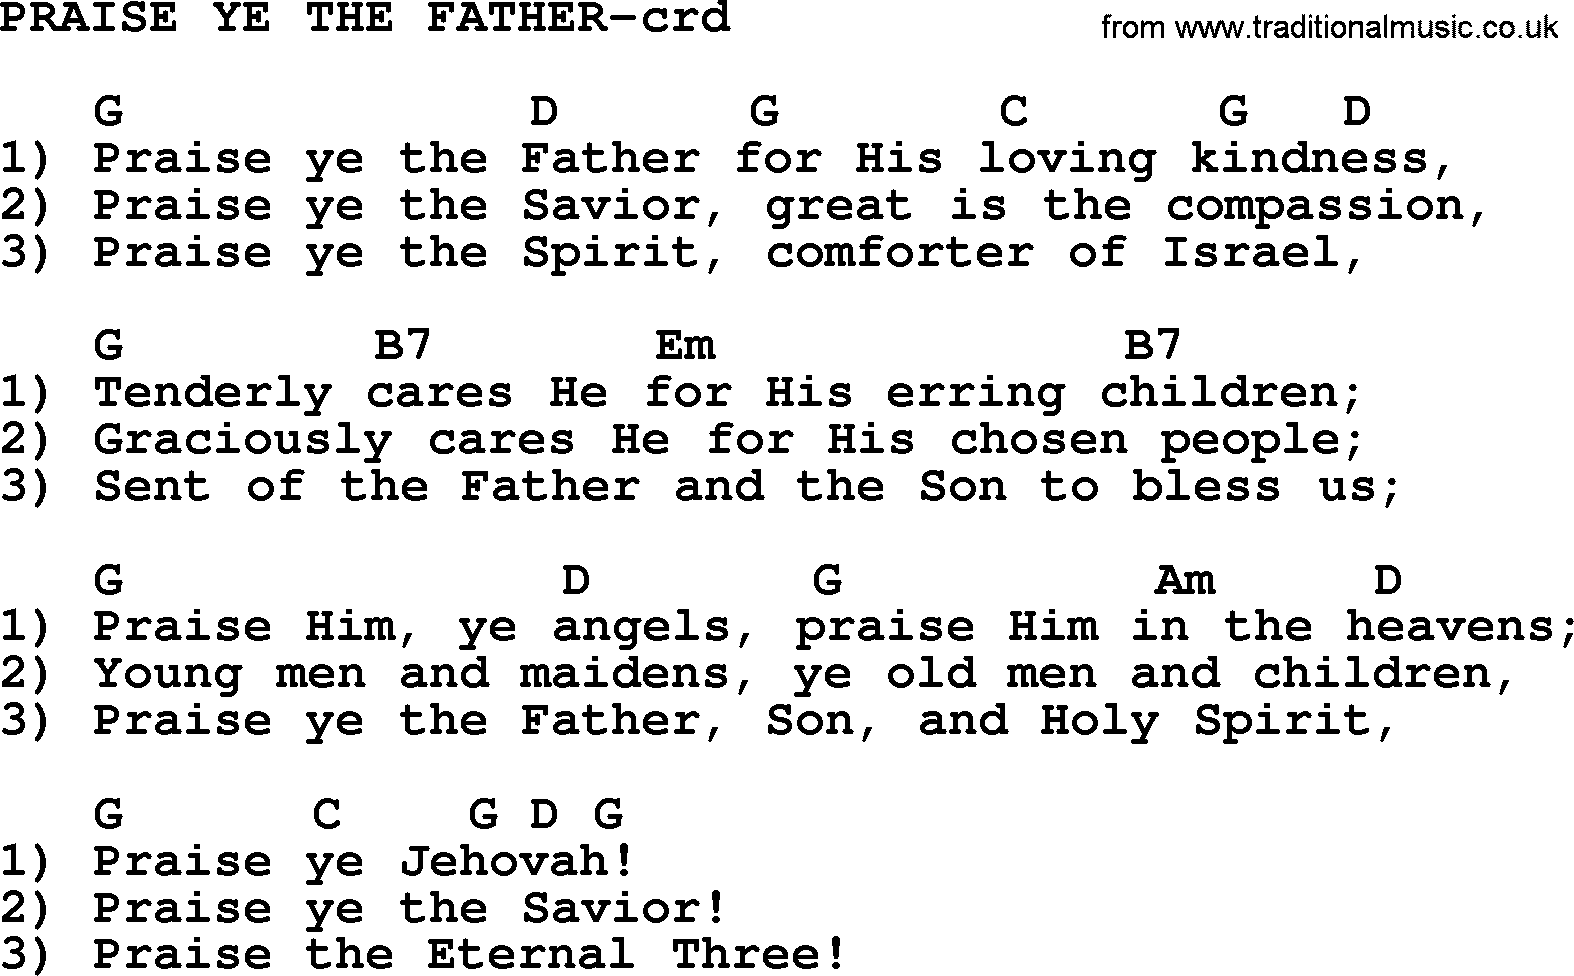 Top 500 Hymn: Praise Ye The Father, lyrics and chords